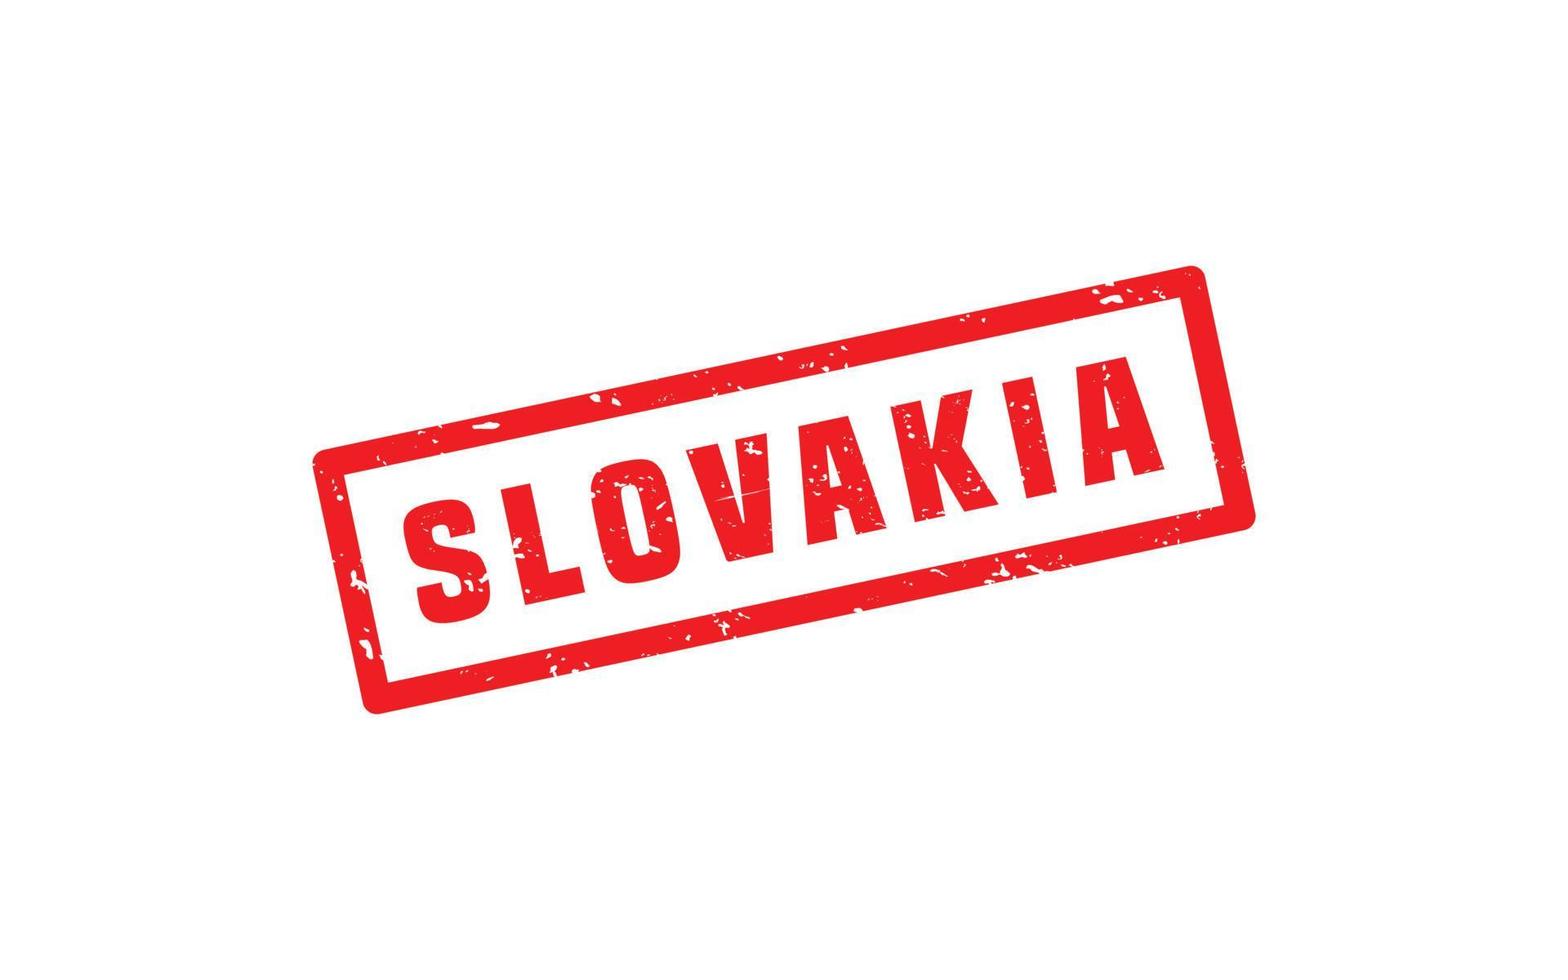 SLOVAKIA stamp rubber with grunge style on white background vector